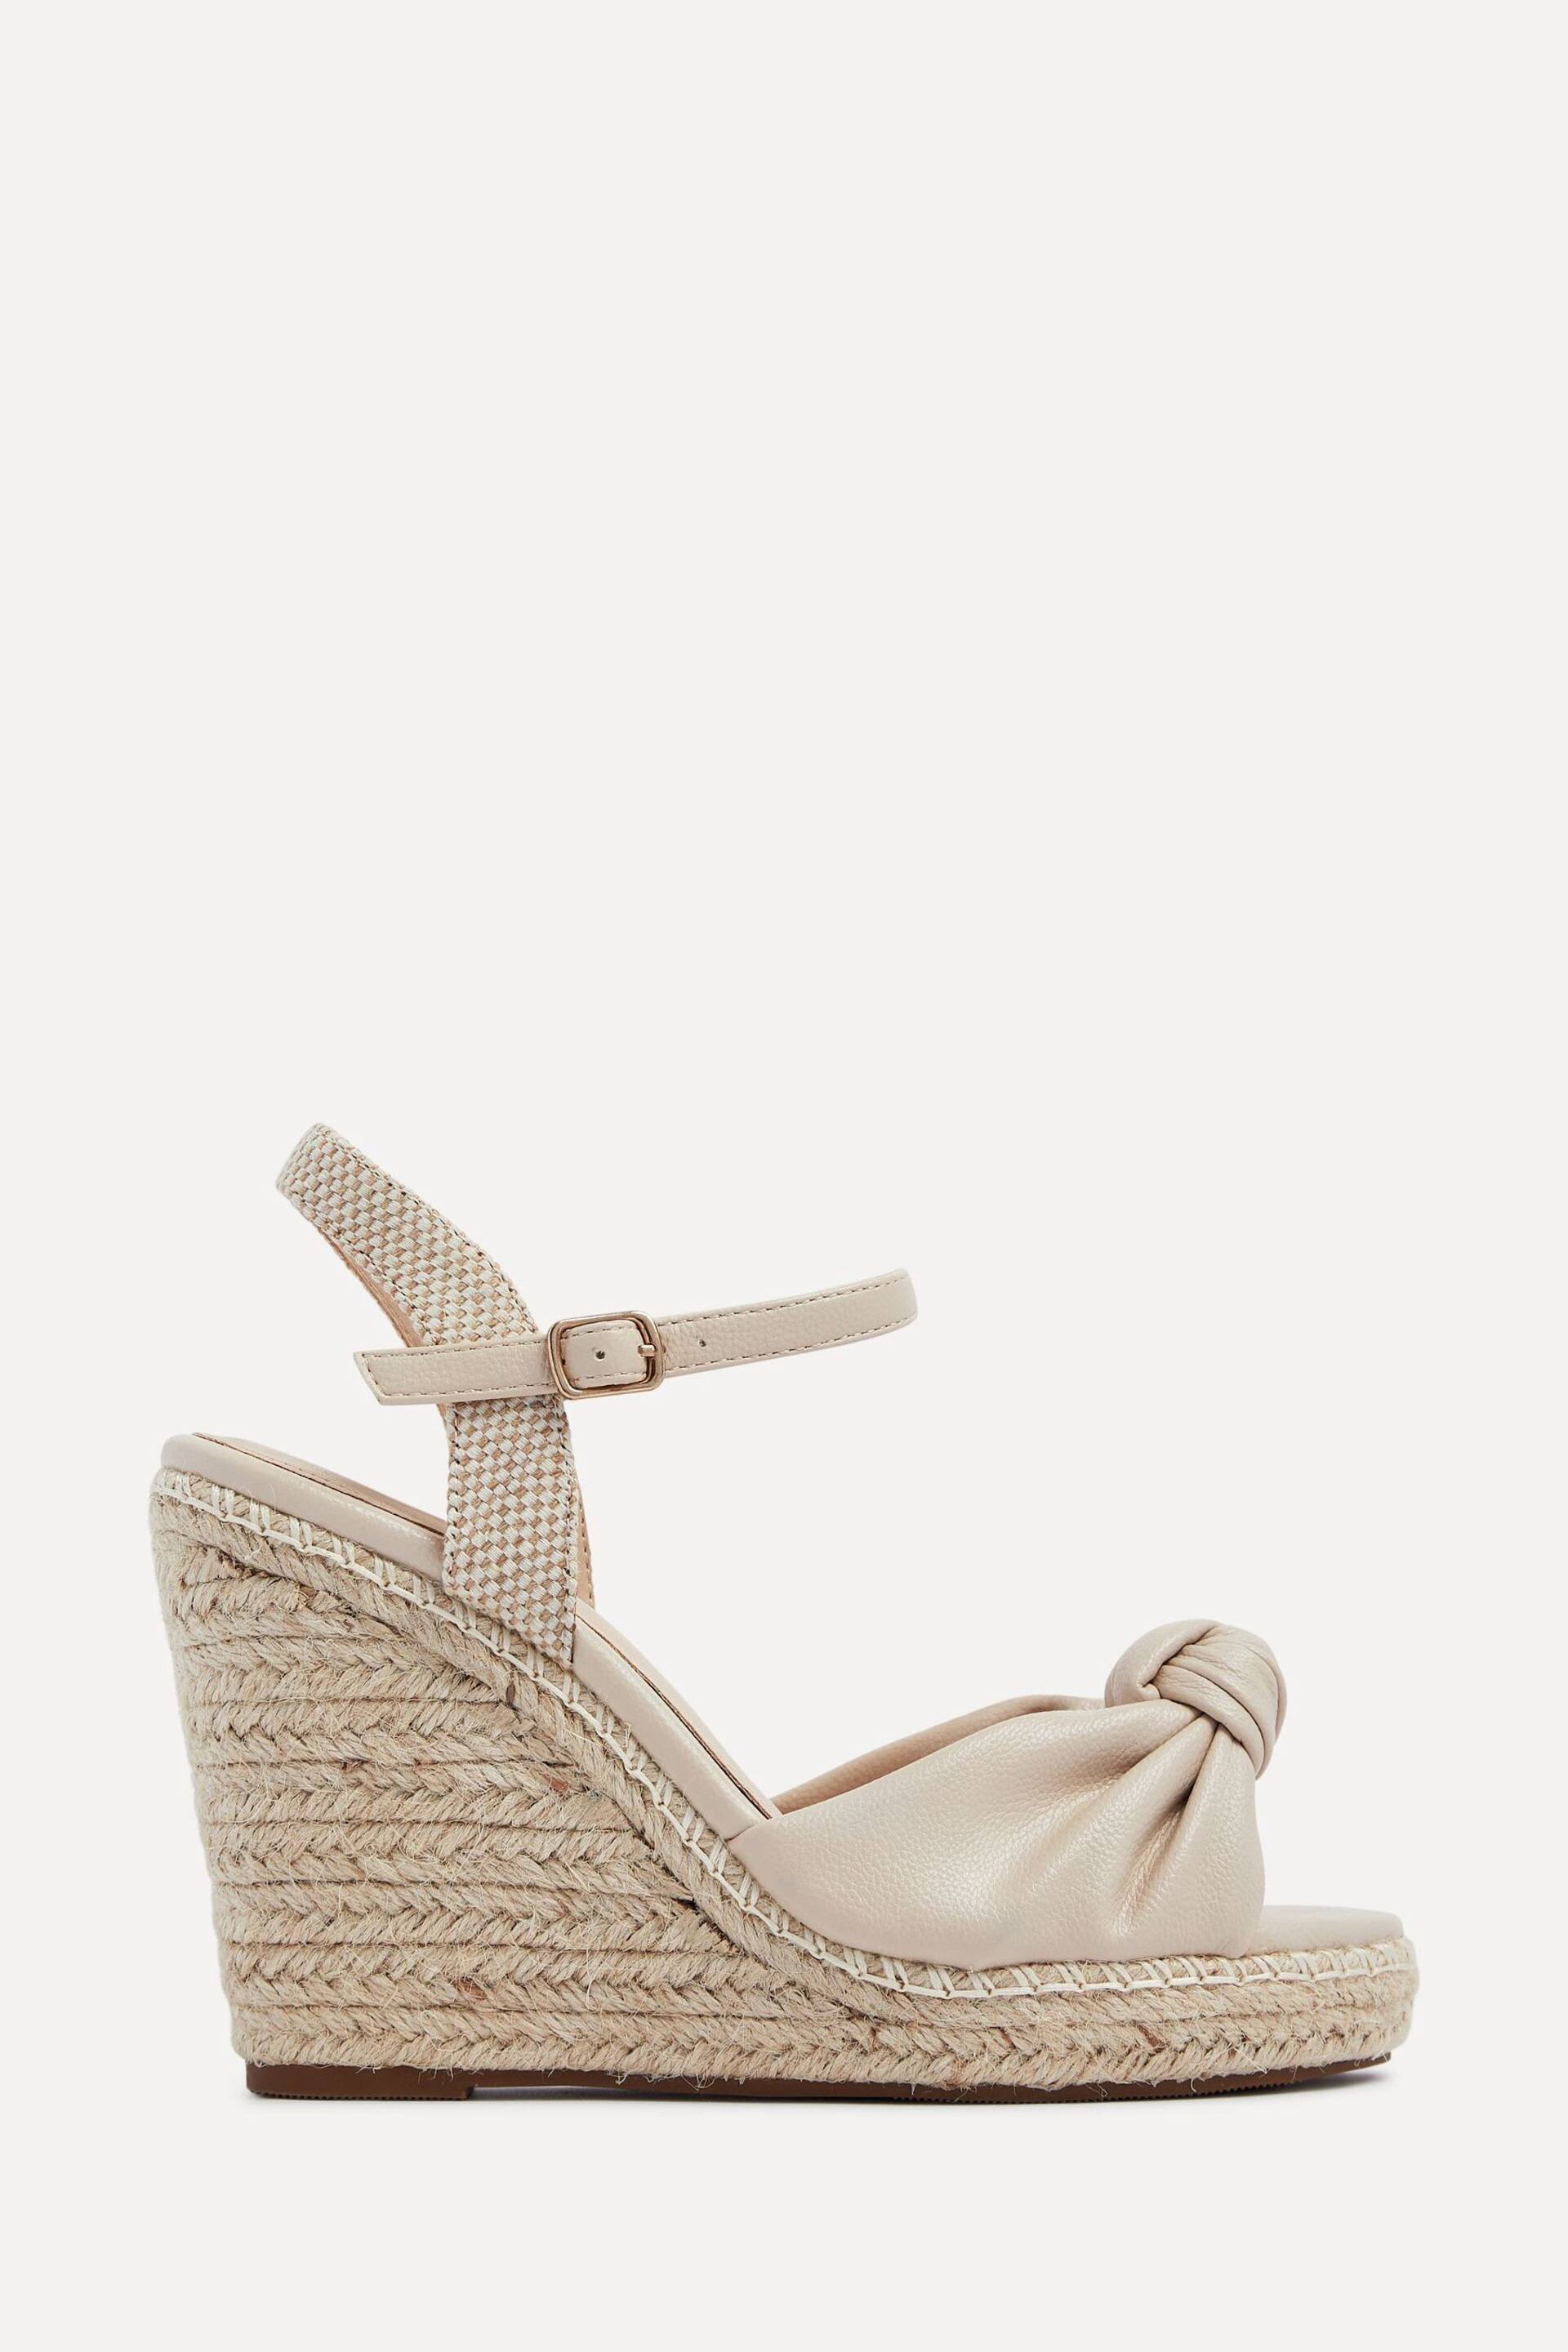 Linzi Cream Rio Rope Platform Wedge Espadrille With Knotted Front Strap - Image 2 of 5